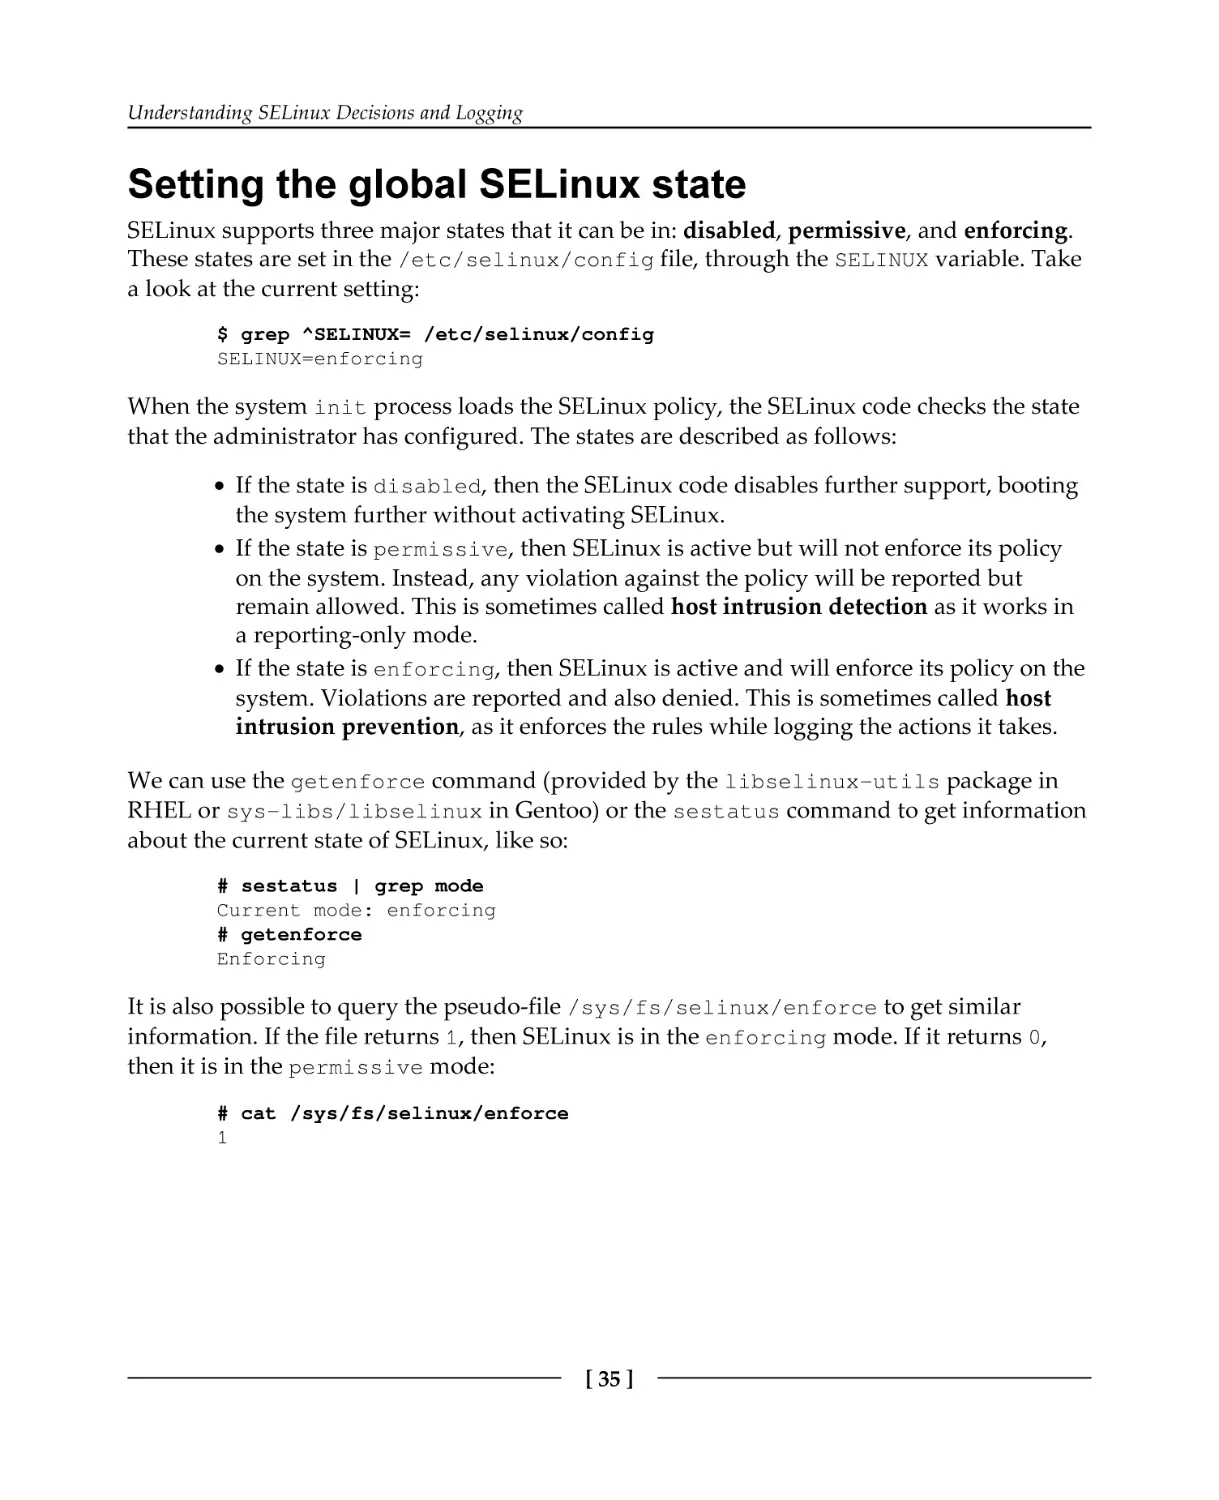 Setting the global SELinux state